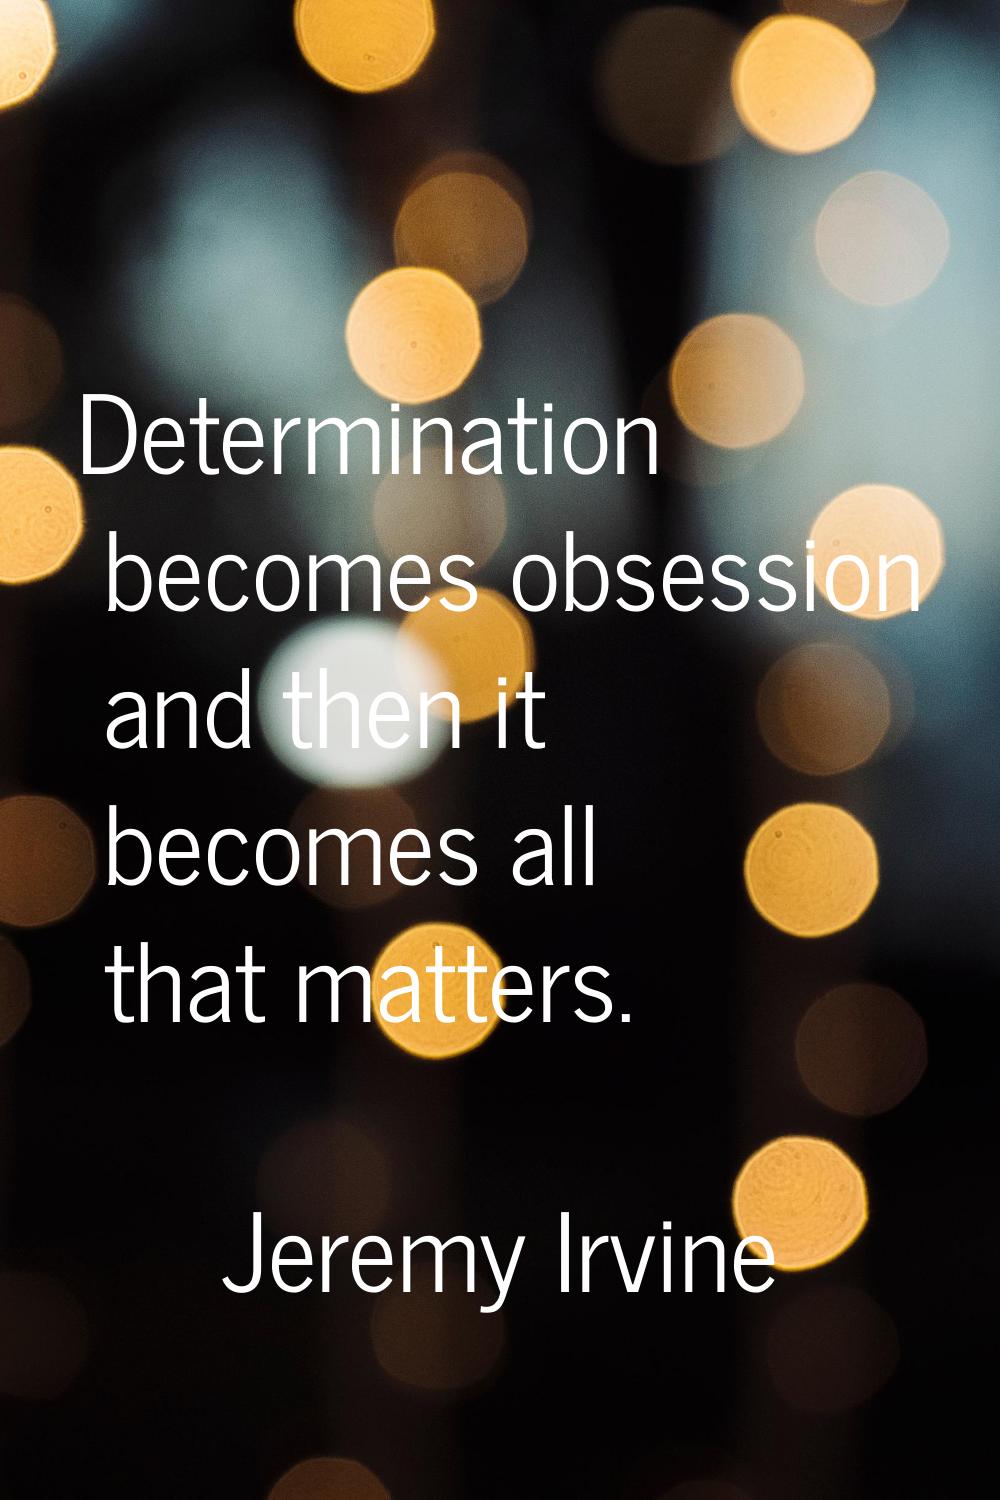 Determination becomes obsession and then it becomes all that matters.